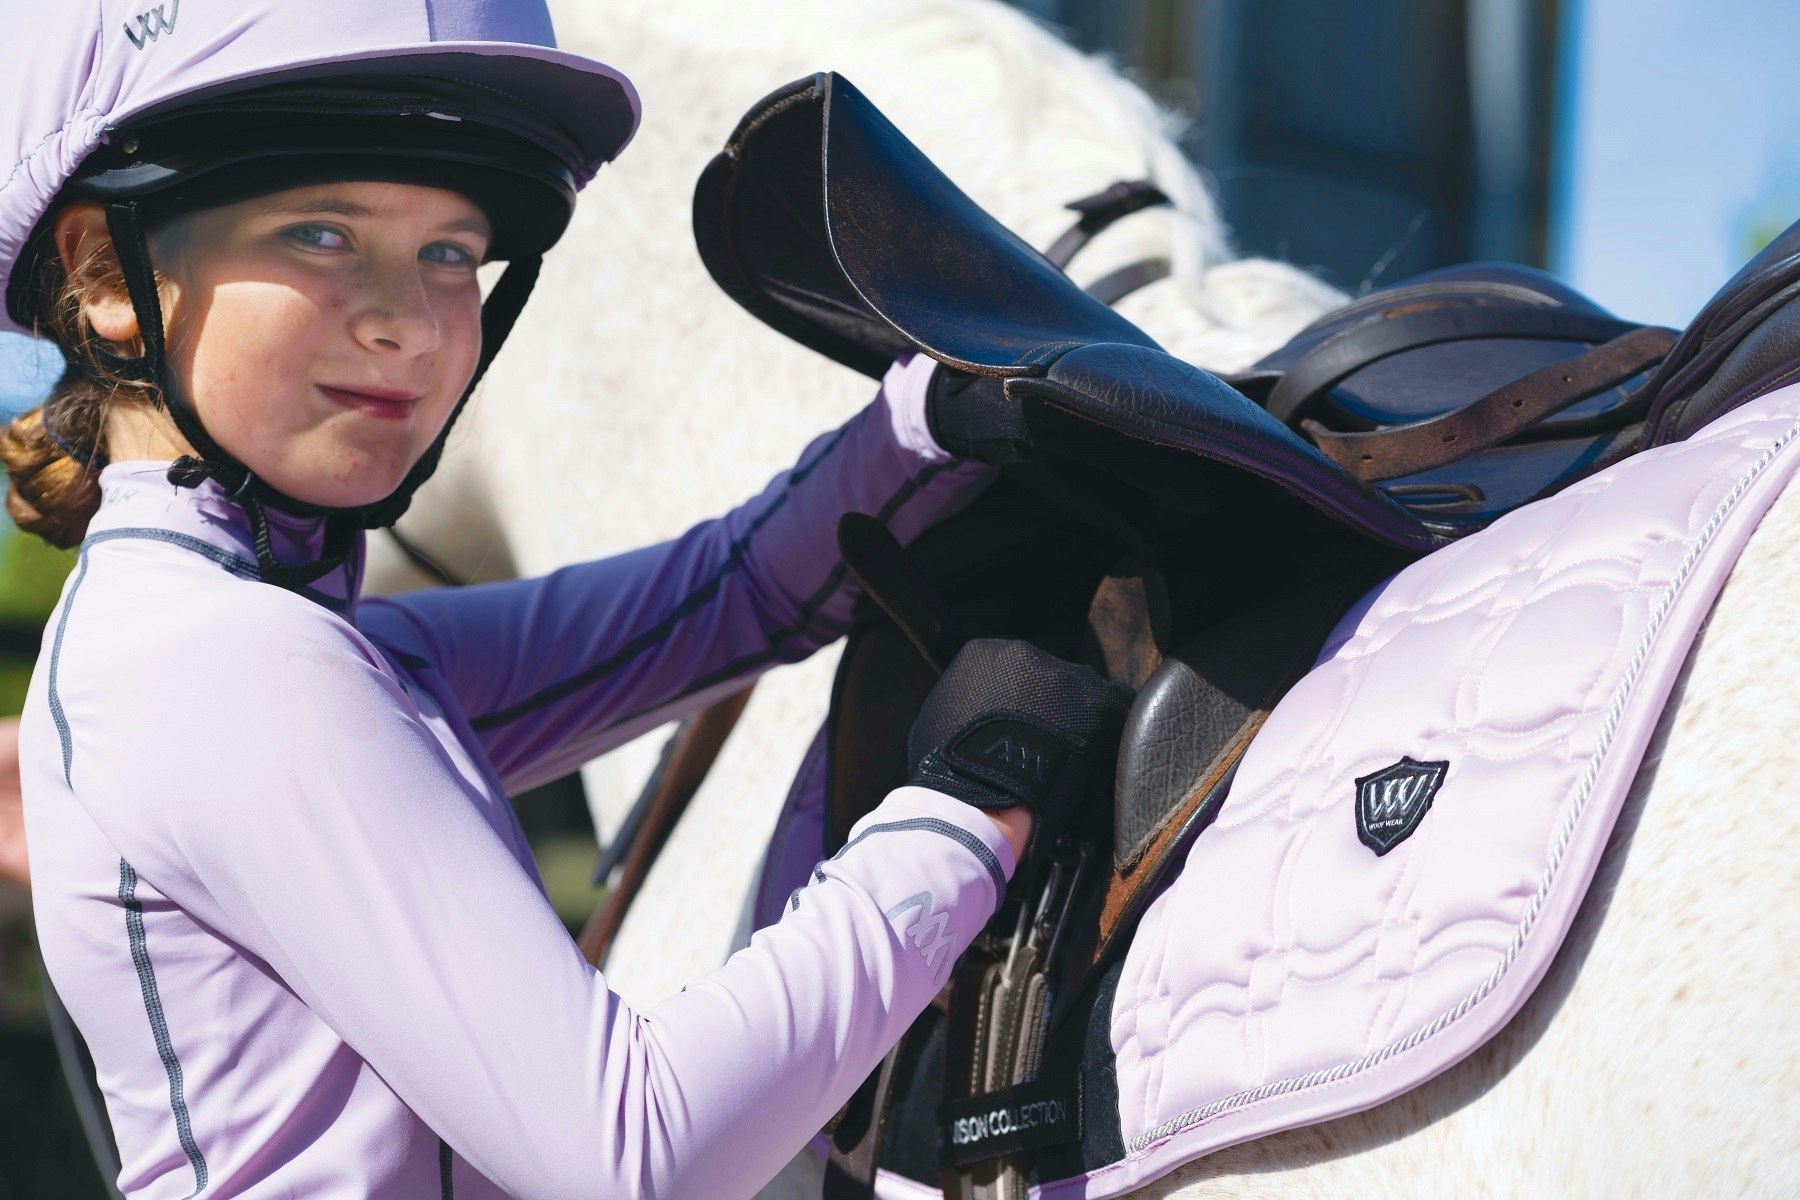 Woof Wear Young Rider Pro Long Sleeve Performance Shirt Lilac